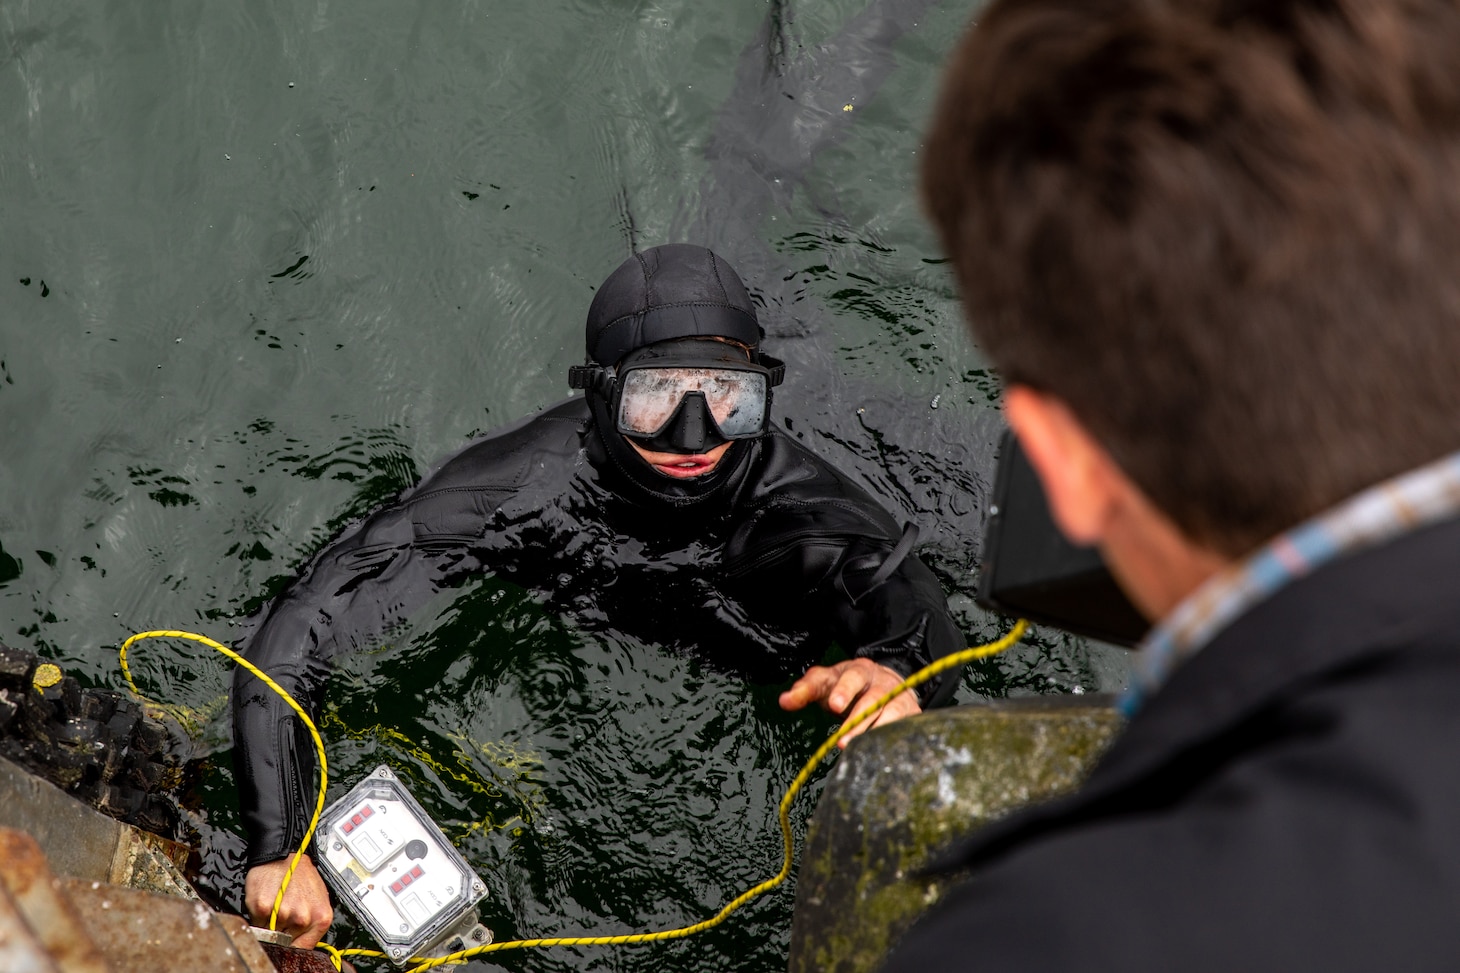 Lt. j.g. Chris Bianchi, assigned to Explosive Ordnance Disposal Mobile Unit (EODMU) 8, conducts diving training during exercise BALTOPS 22, June 10, 2022.